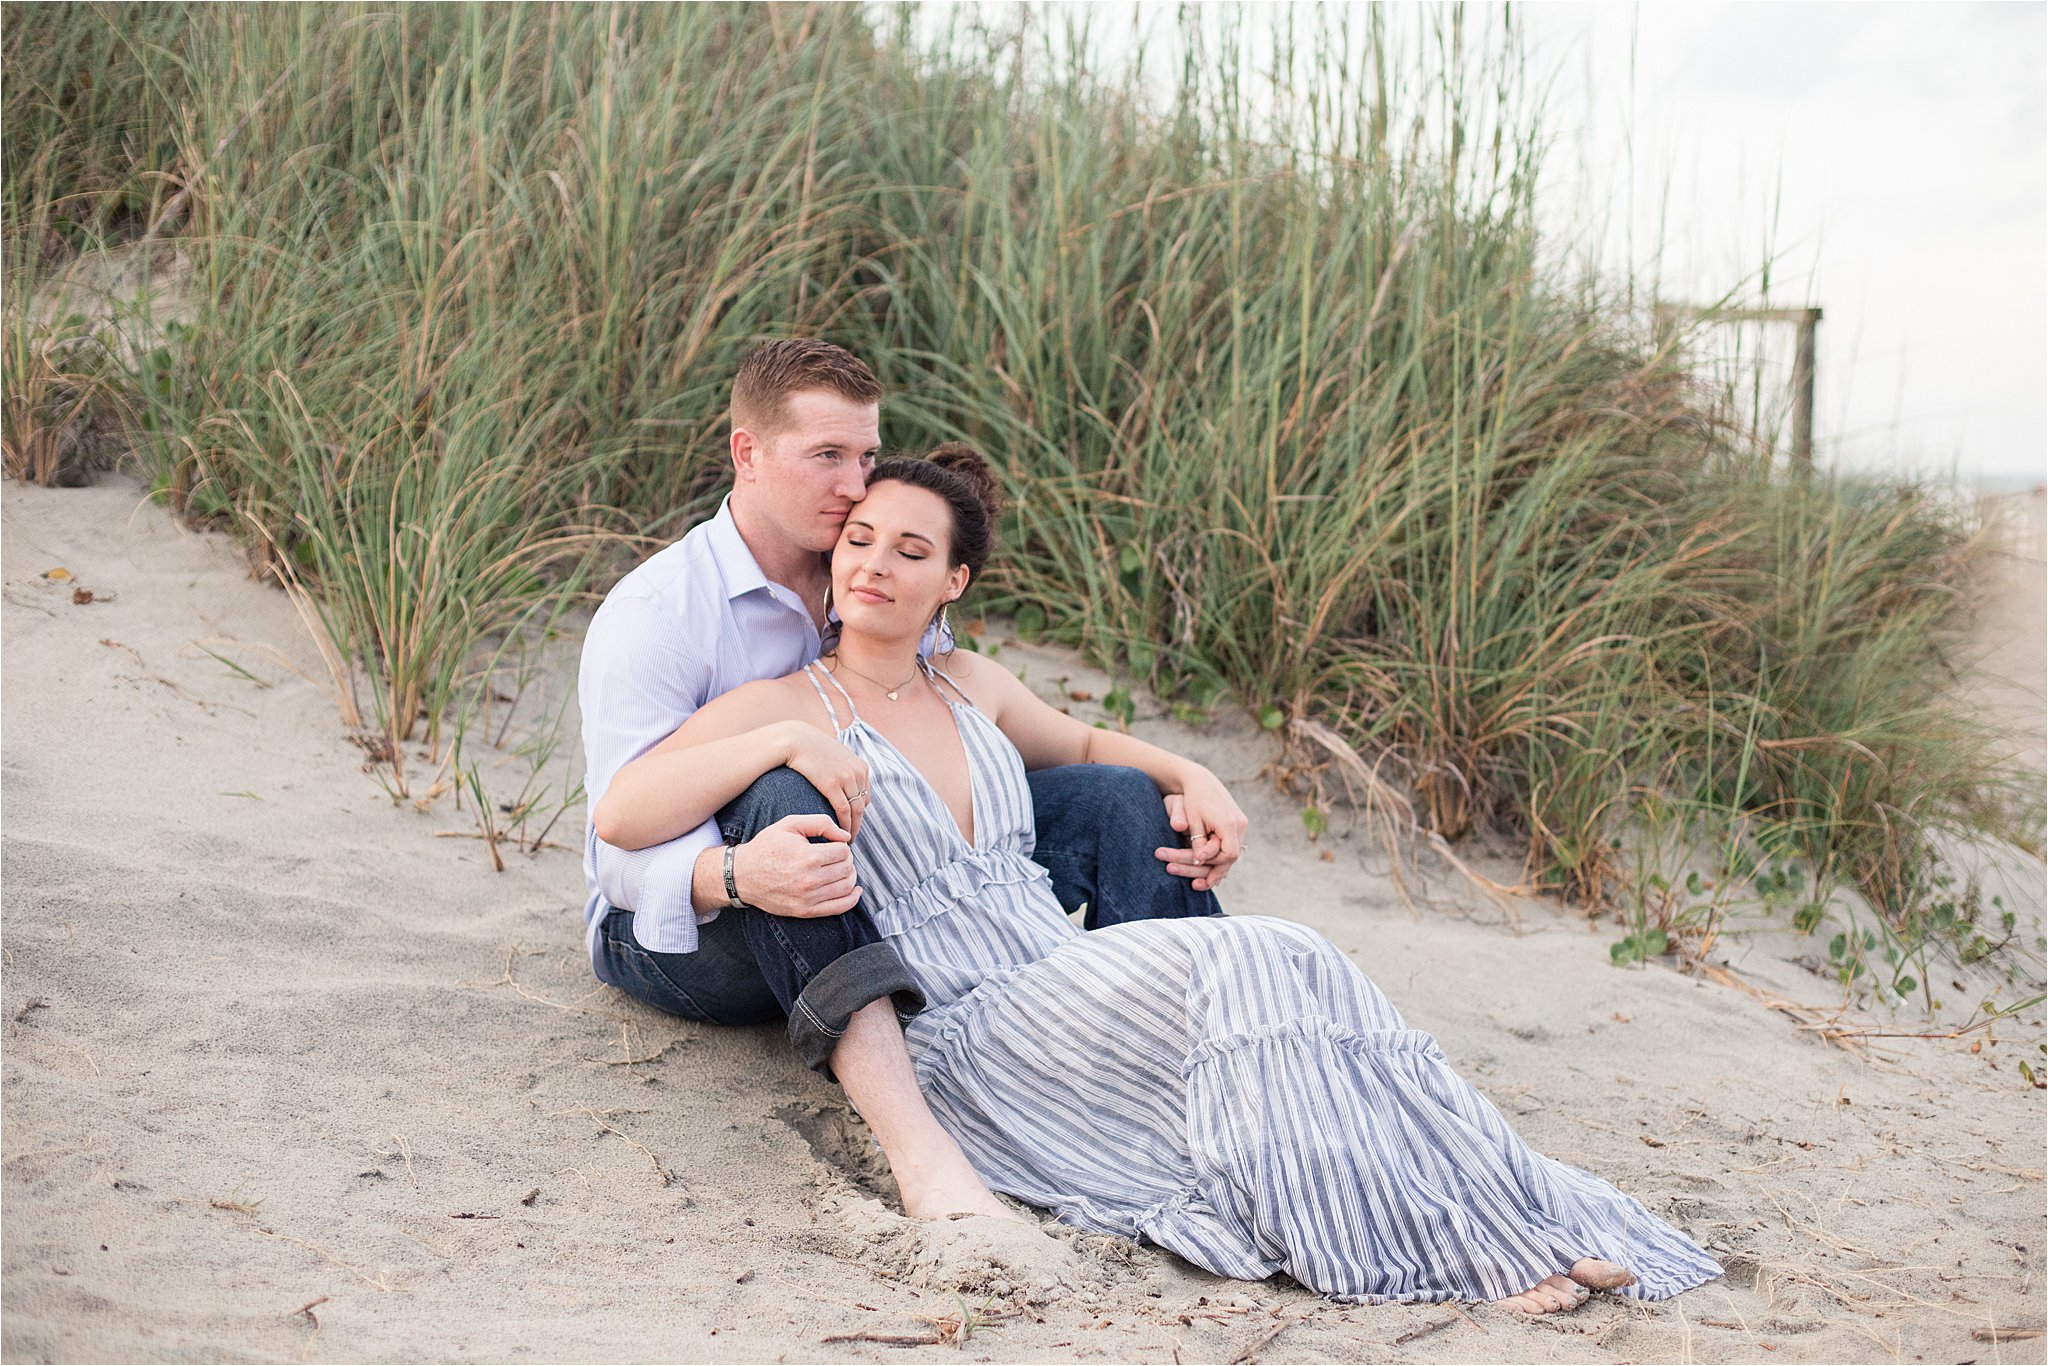 Tybee island engagement photography at sunset